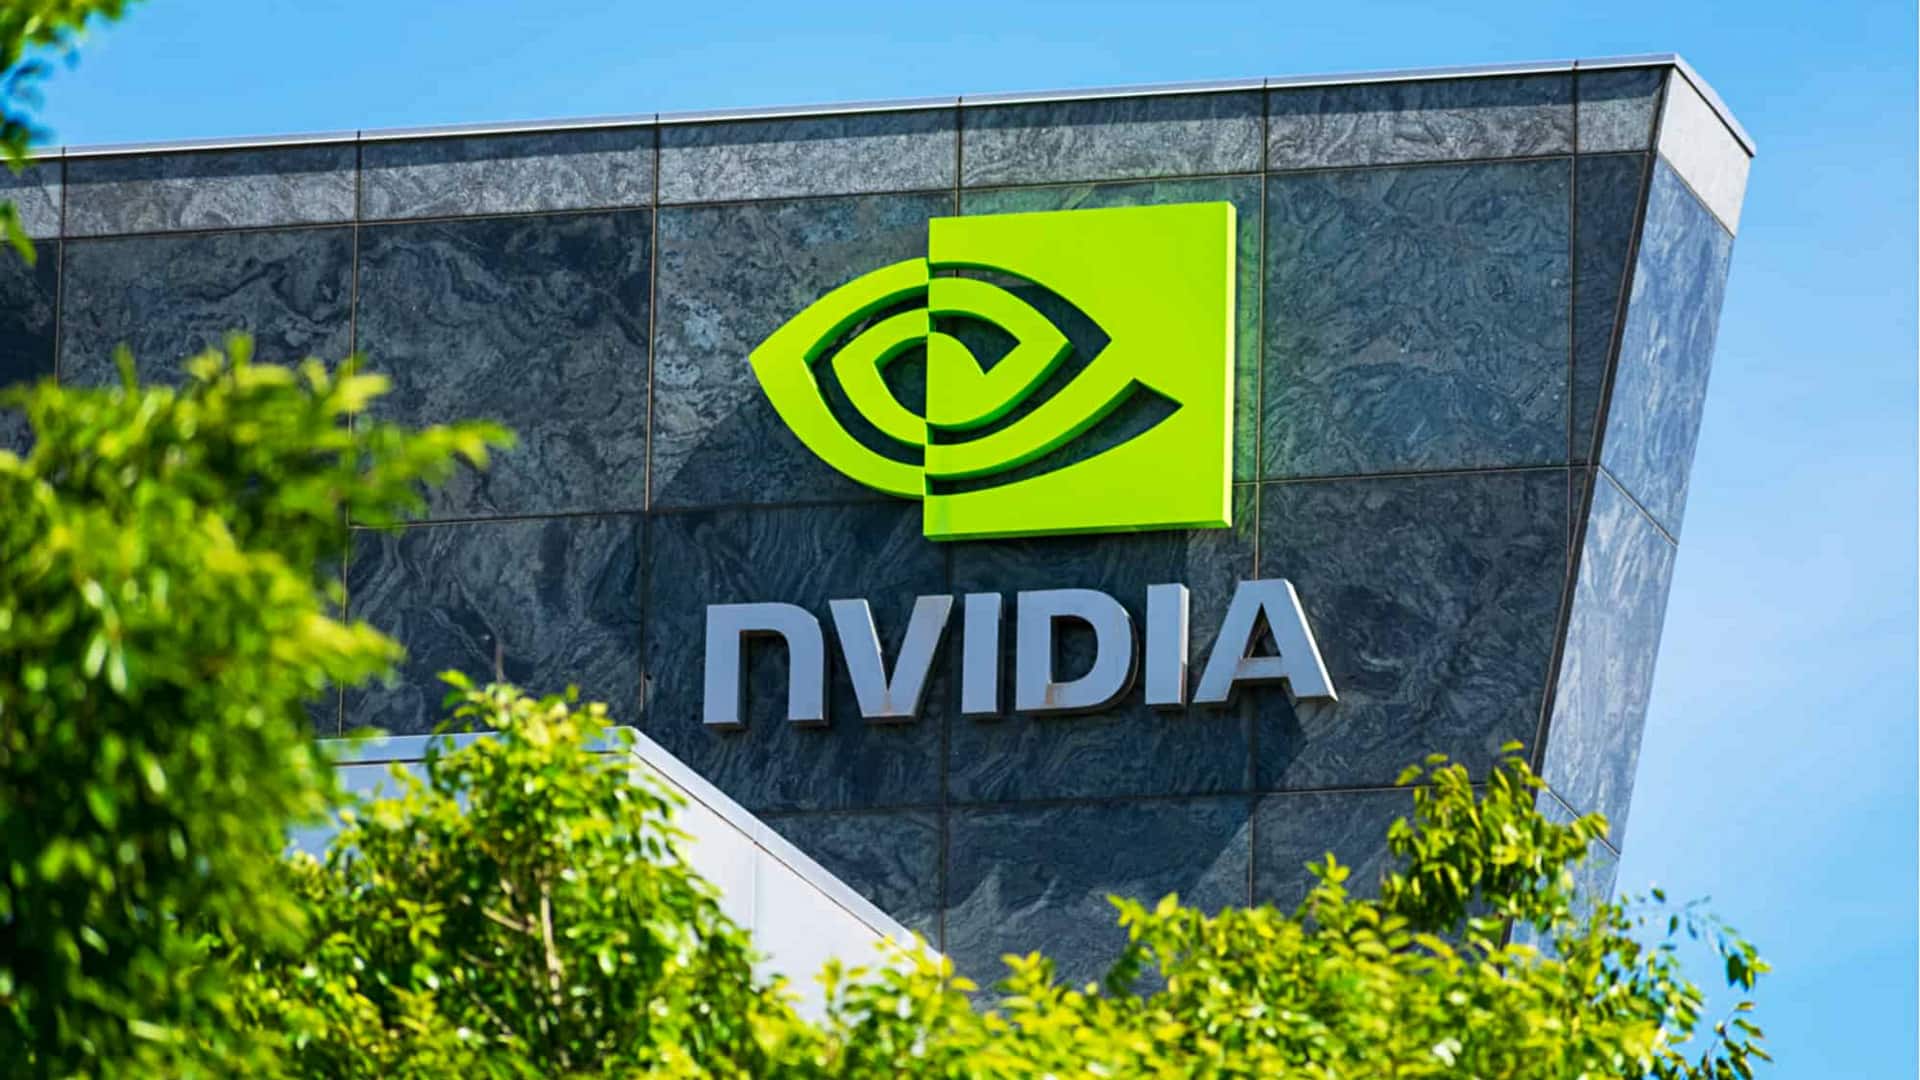 NVIDIA surpasses Saudi Aramco, becomes 3rd largest company by m-cap